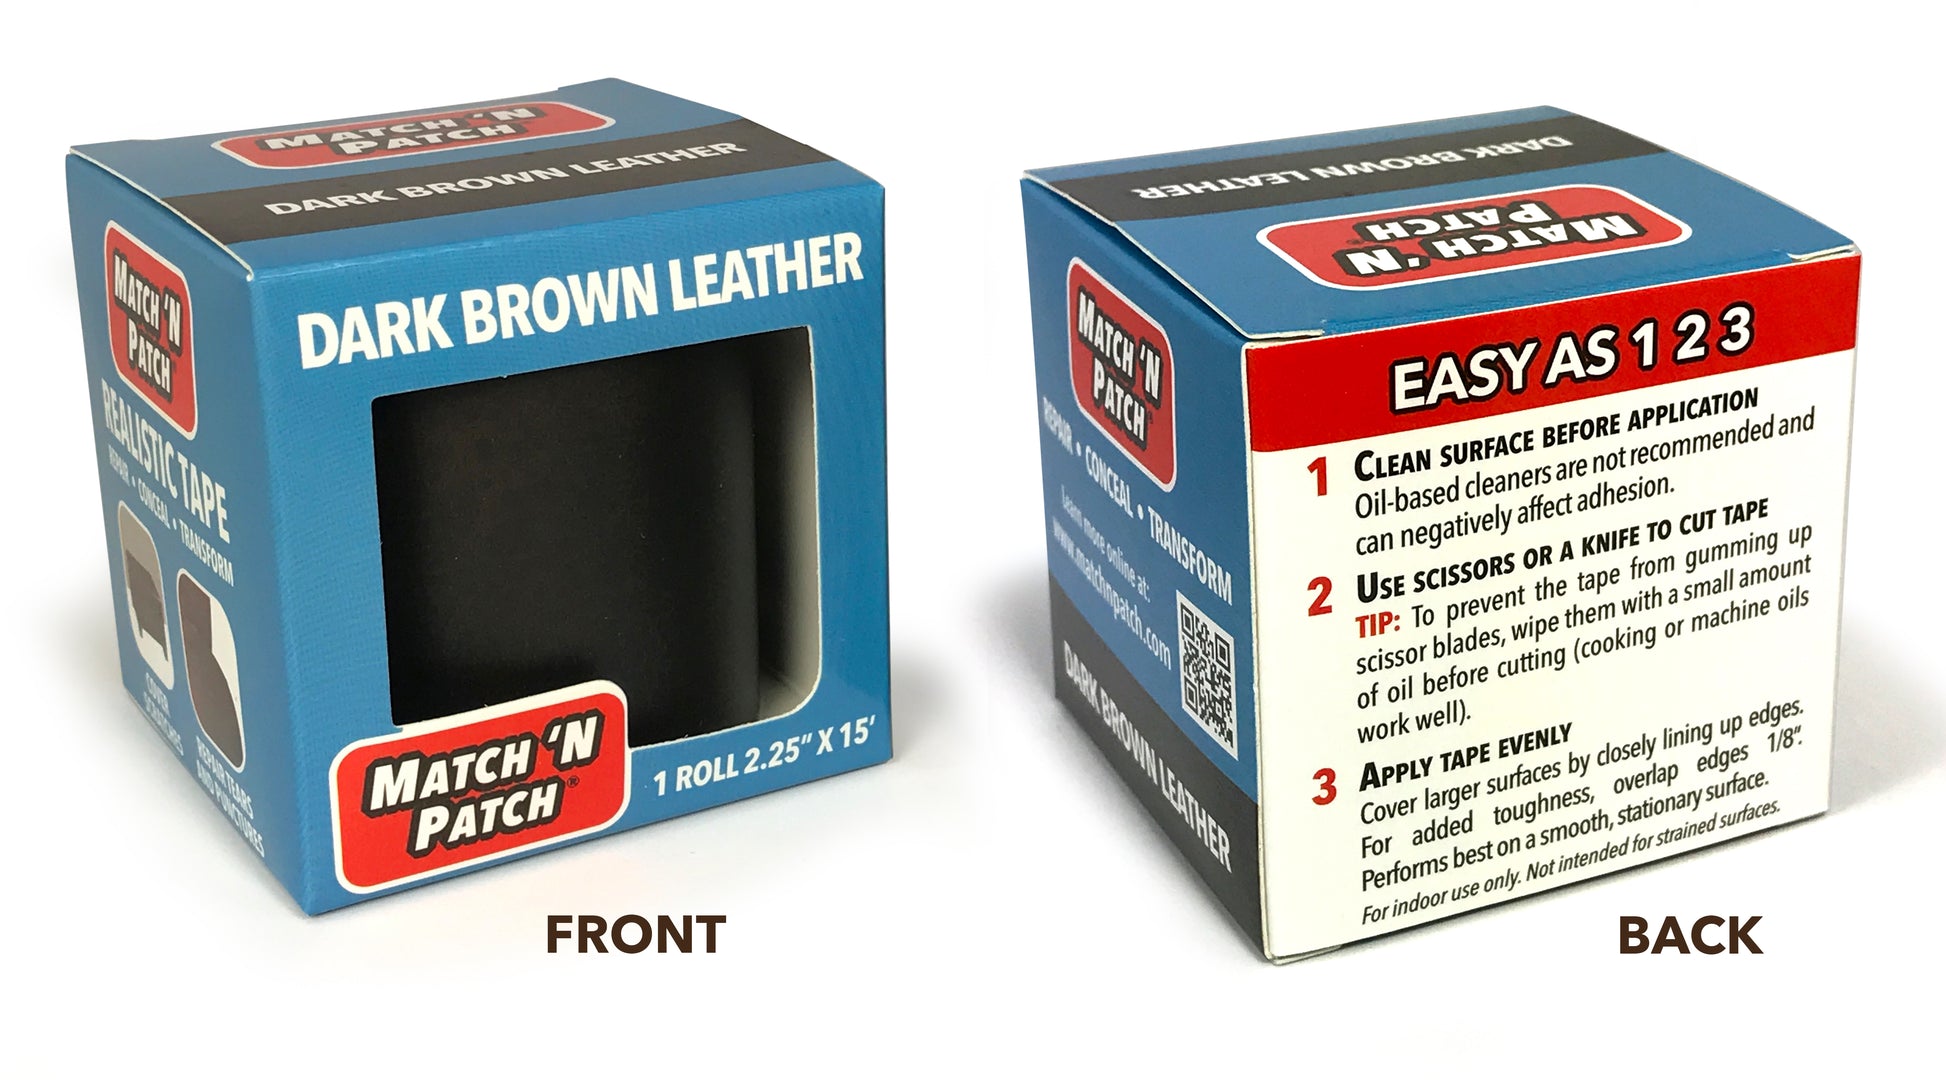 DARK BROWN Leather Repair Kit for holes, tears, scratches burns